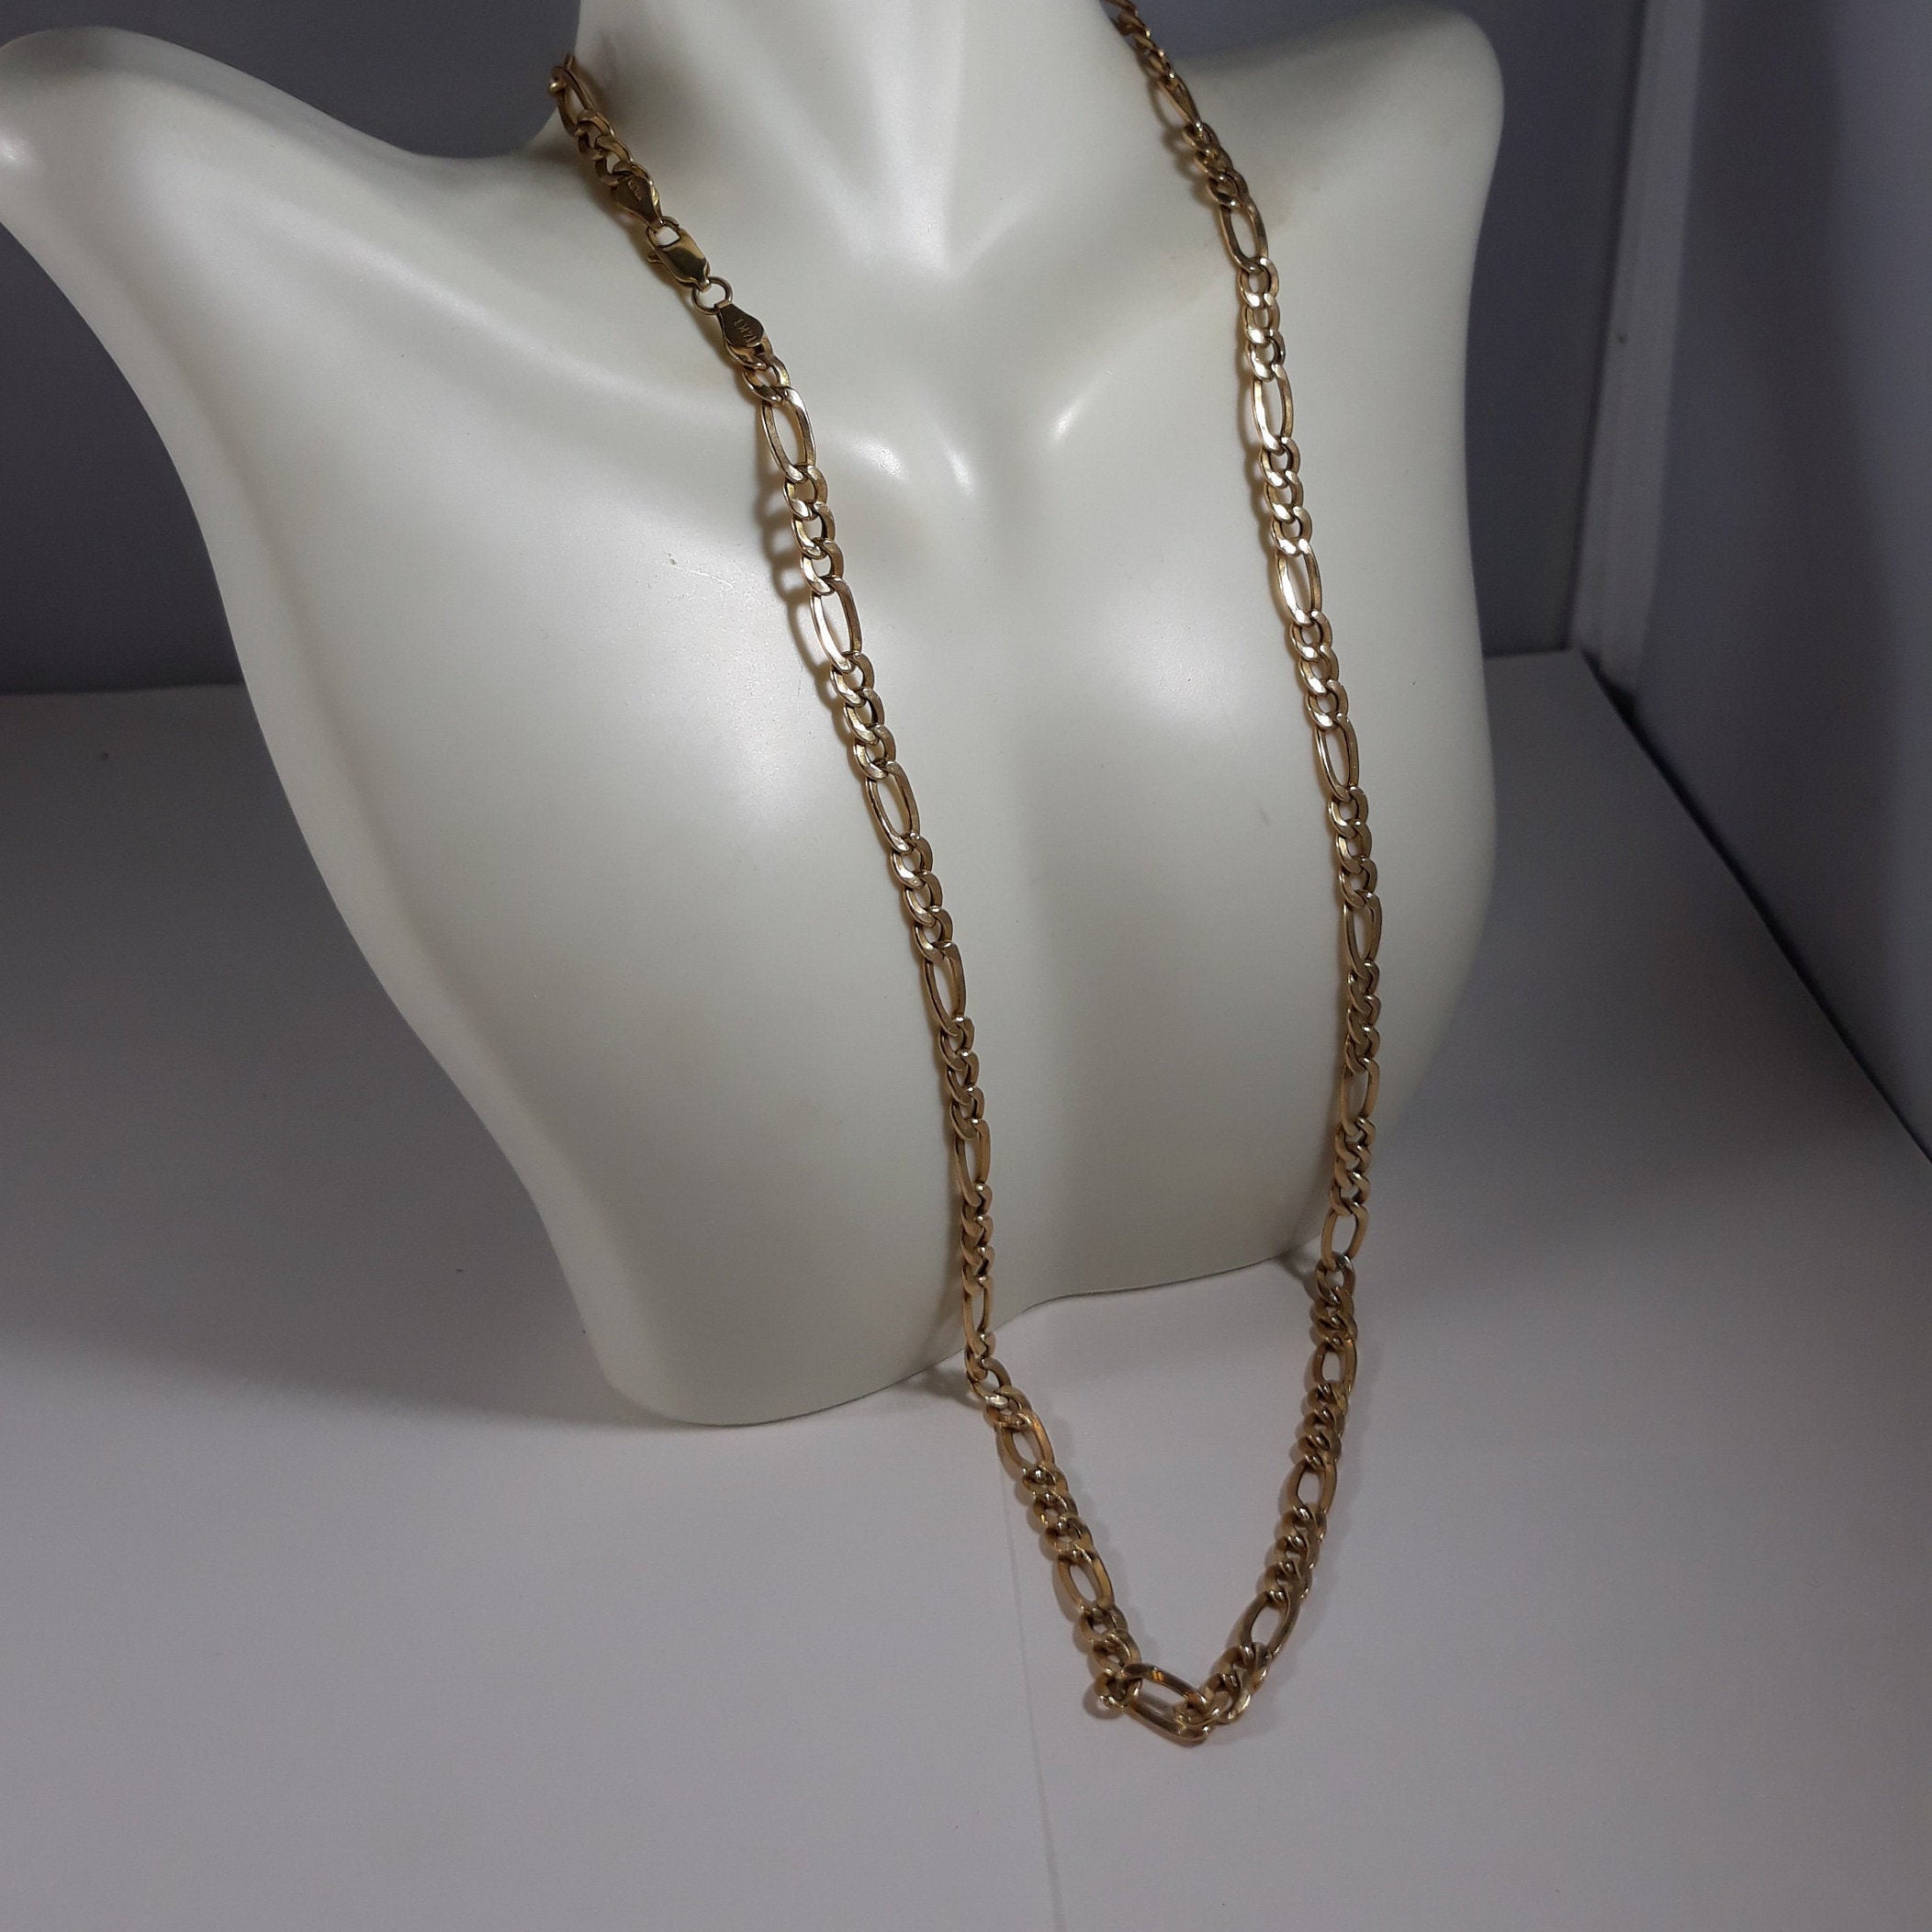 Layered Chain Necklaces for women 18 Inch Gold Plated Paperclip Chain  Silver Tone Choker Necklace Rope Ball Chains Punk Jewelry